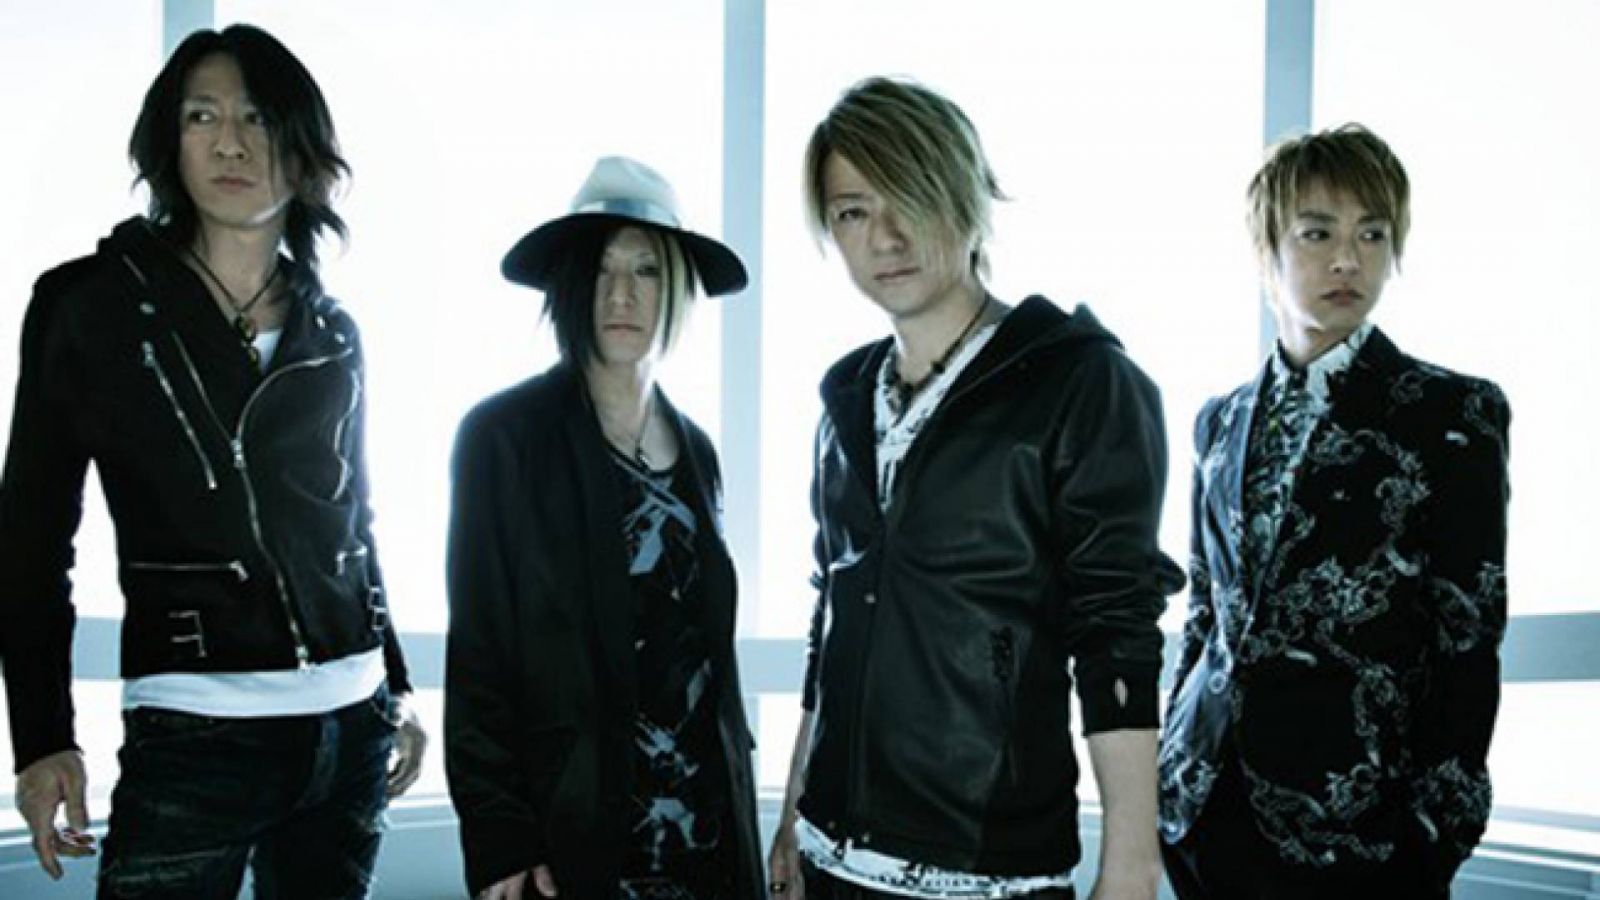 GLAY anuncia novo single © loversoul music & associates. All rights reserved.